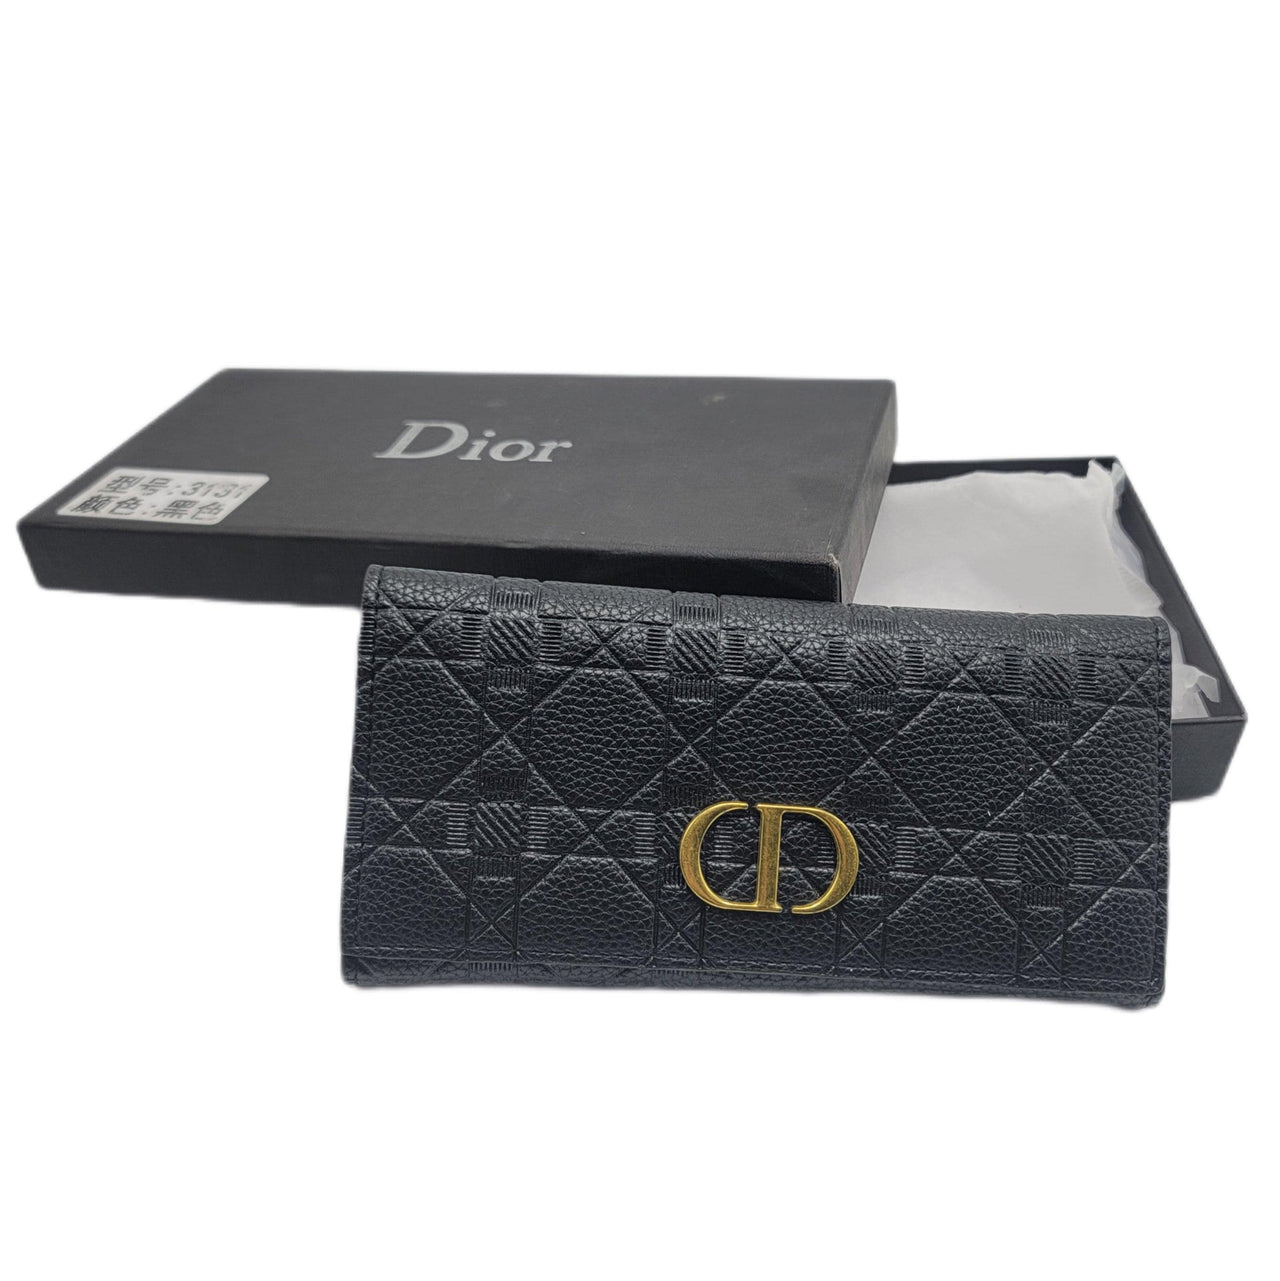 The Bag Couture Luggage & Bags Christian Dior 3 Fold Wallet Black